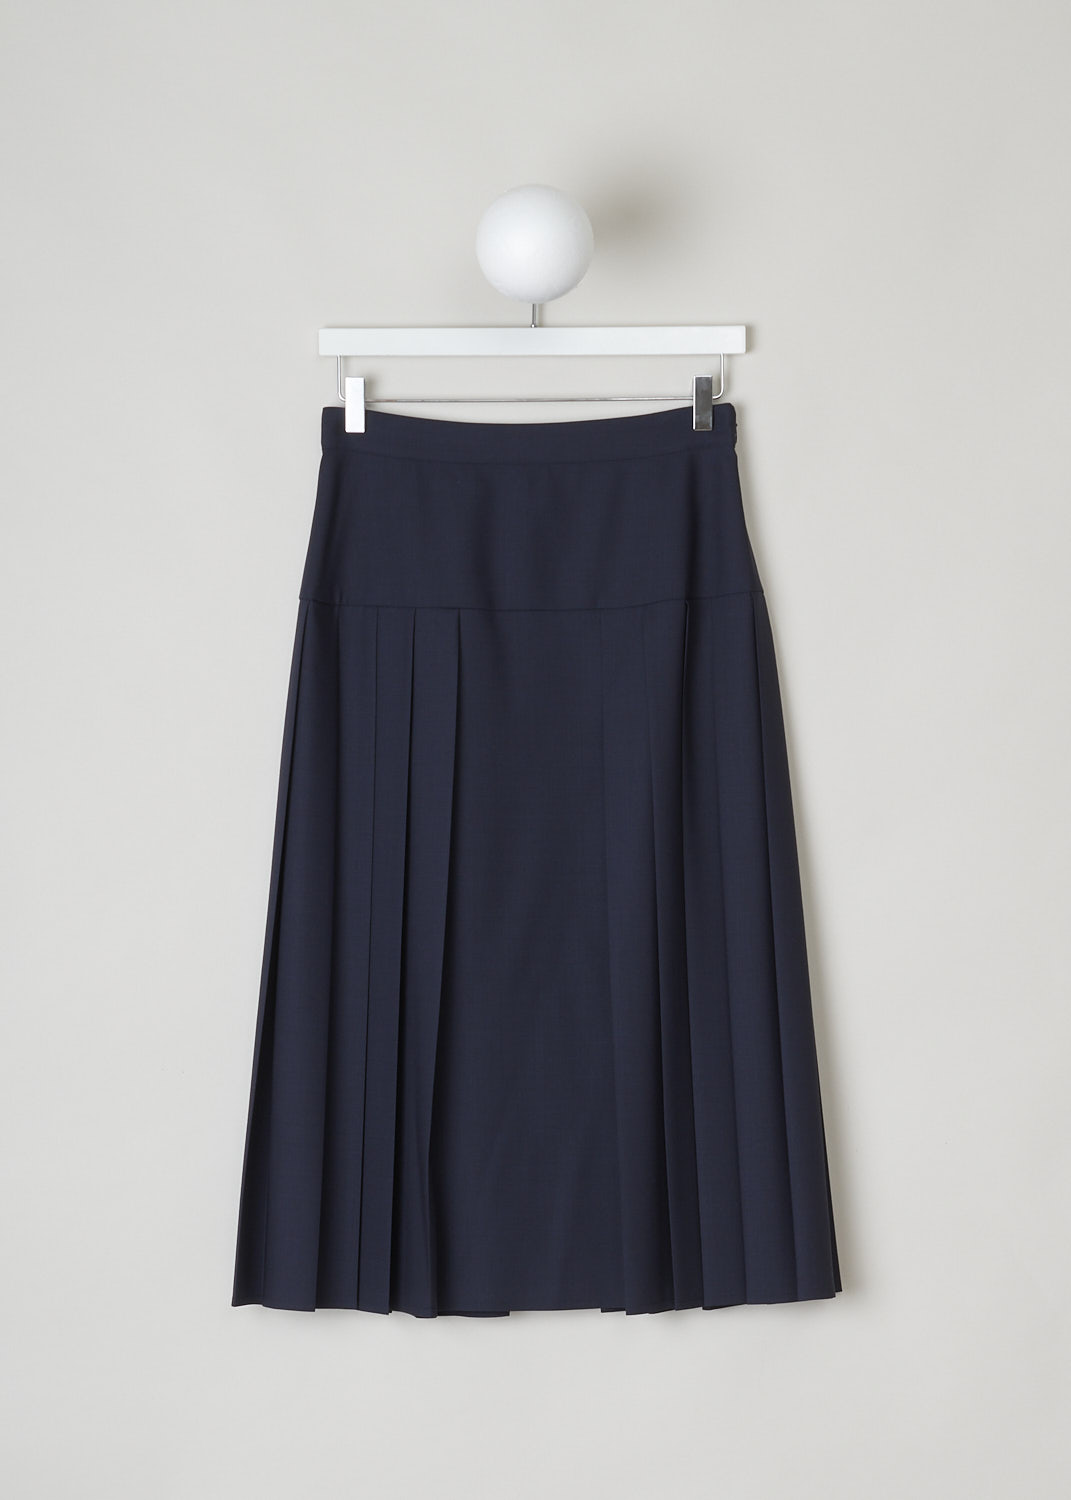 ASPESI, NAVY BLUE PLEATED MIDI SKIRT, 2207_G286_01098, Blue, Front, This navy blue wool-blend midi skirt has a broad waistband and pleats along the sides. The skirt has a straight hemline. A concealed zipper in the side seam functions as the closure option. 
